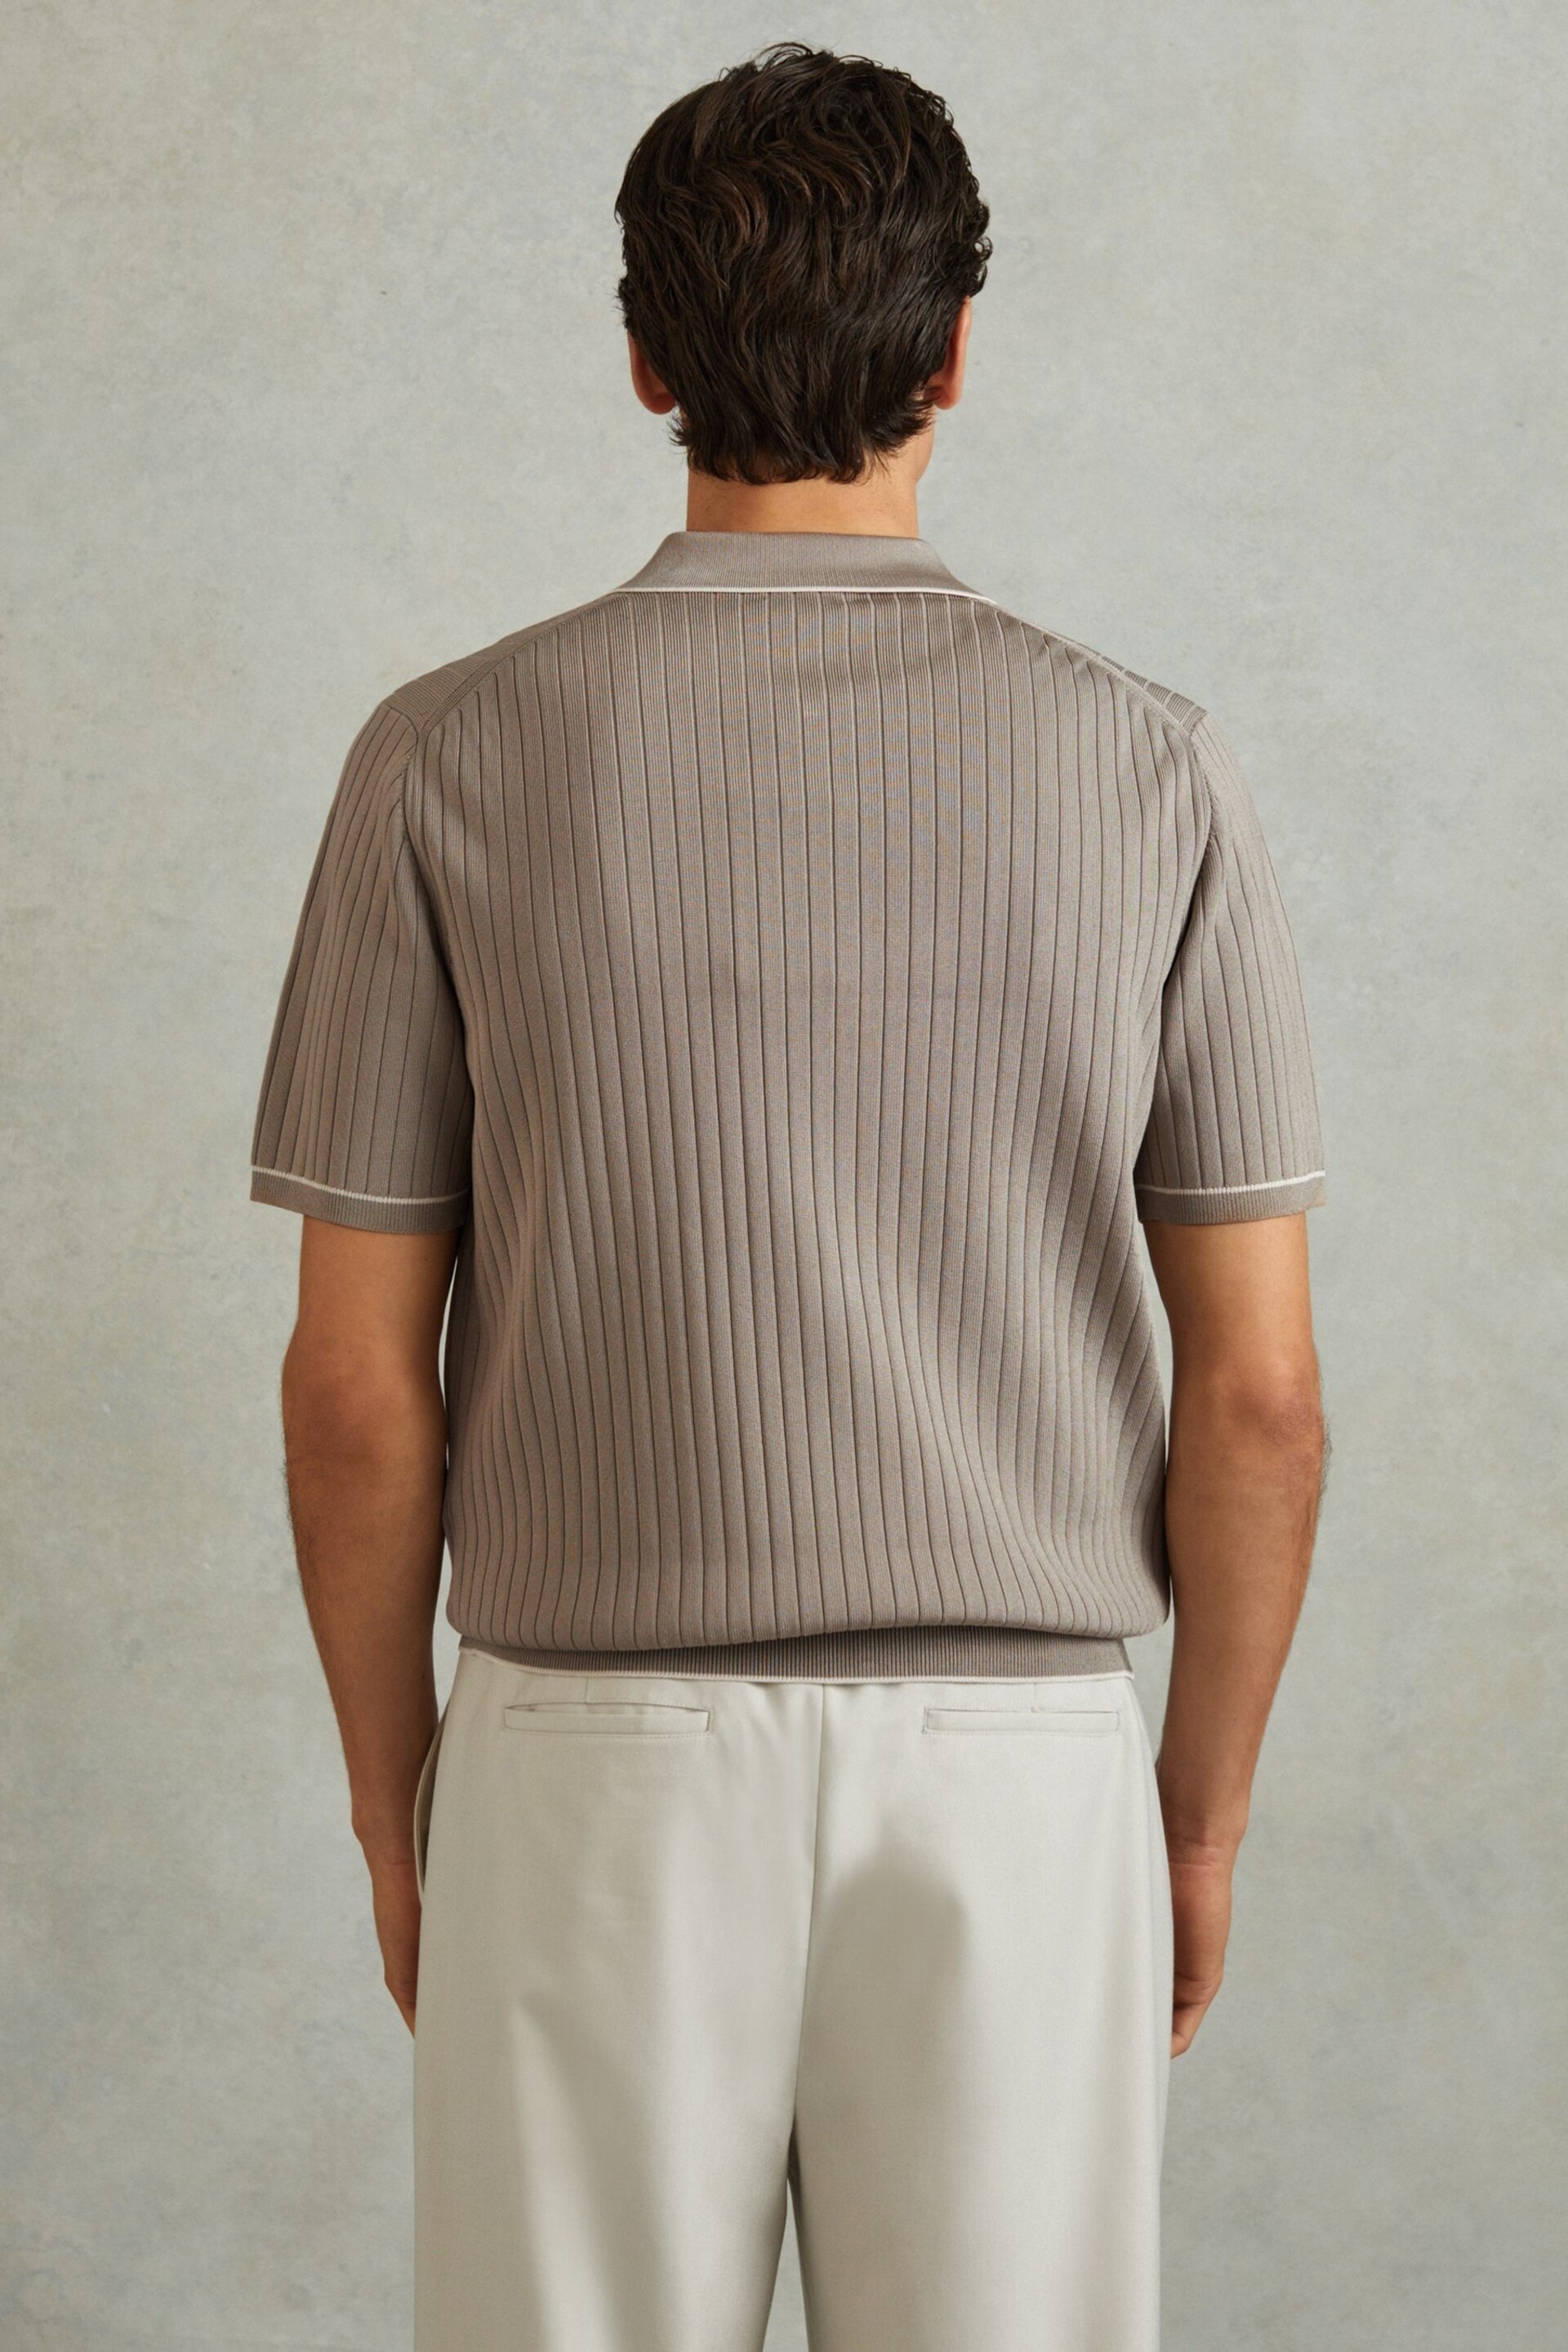 Reiss Stone Christophe Ribbed Dual Zip-Front Shirt - Image 5 of 6